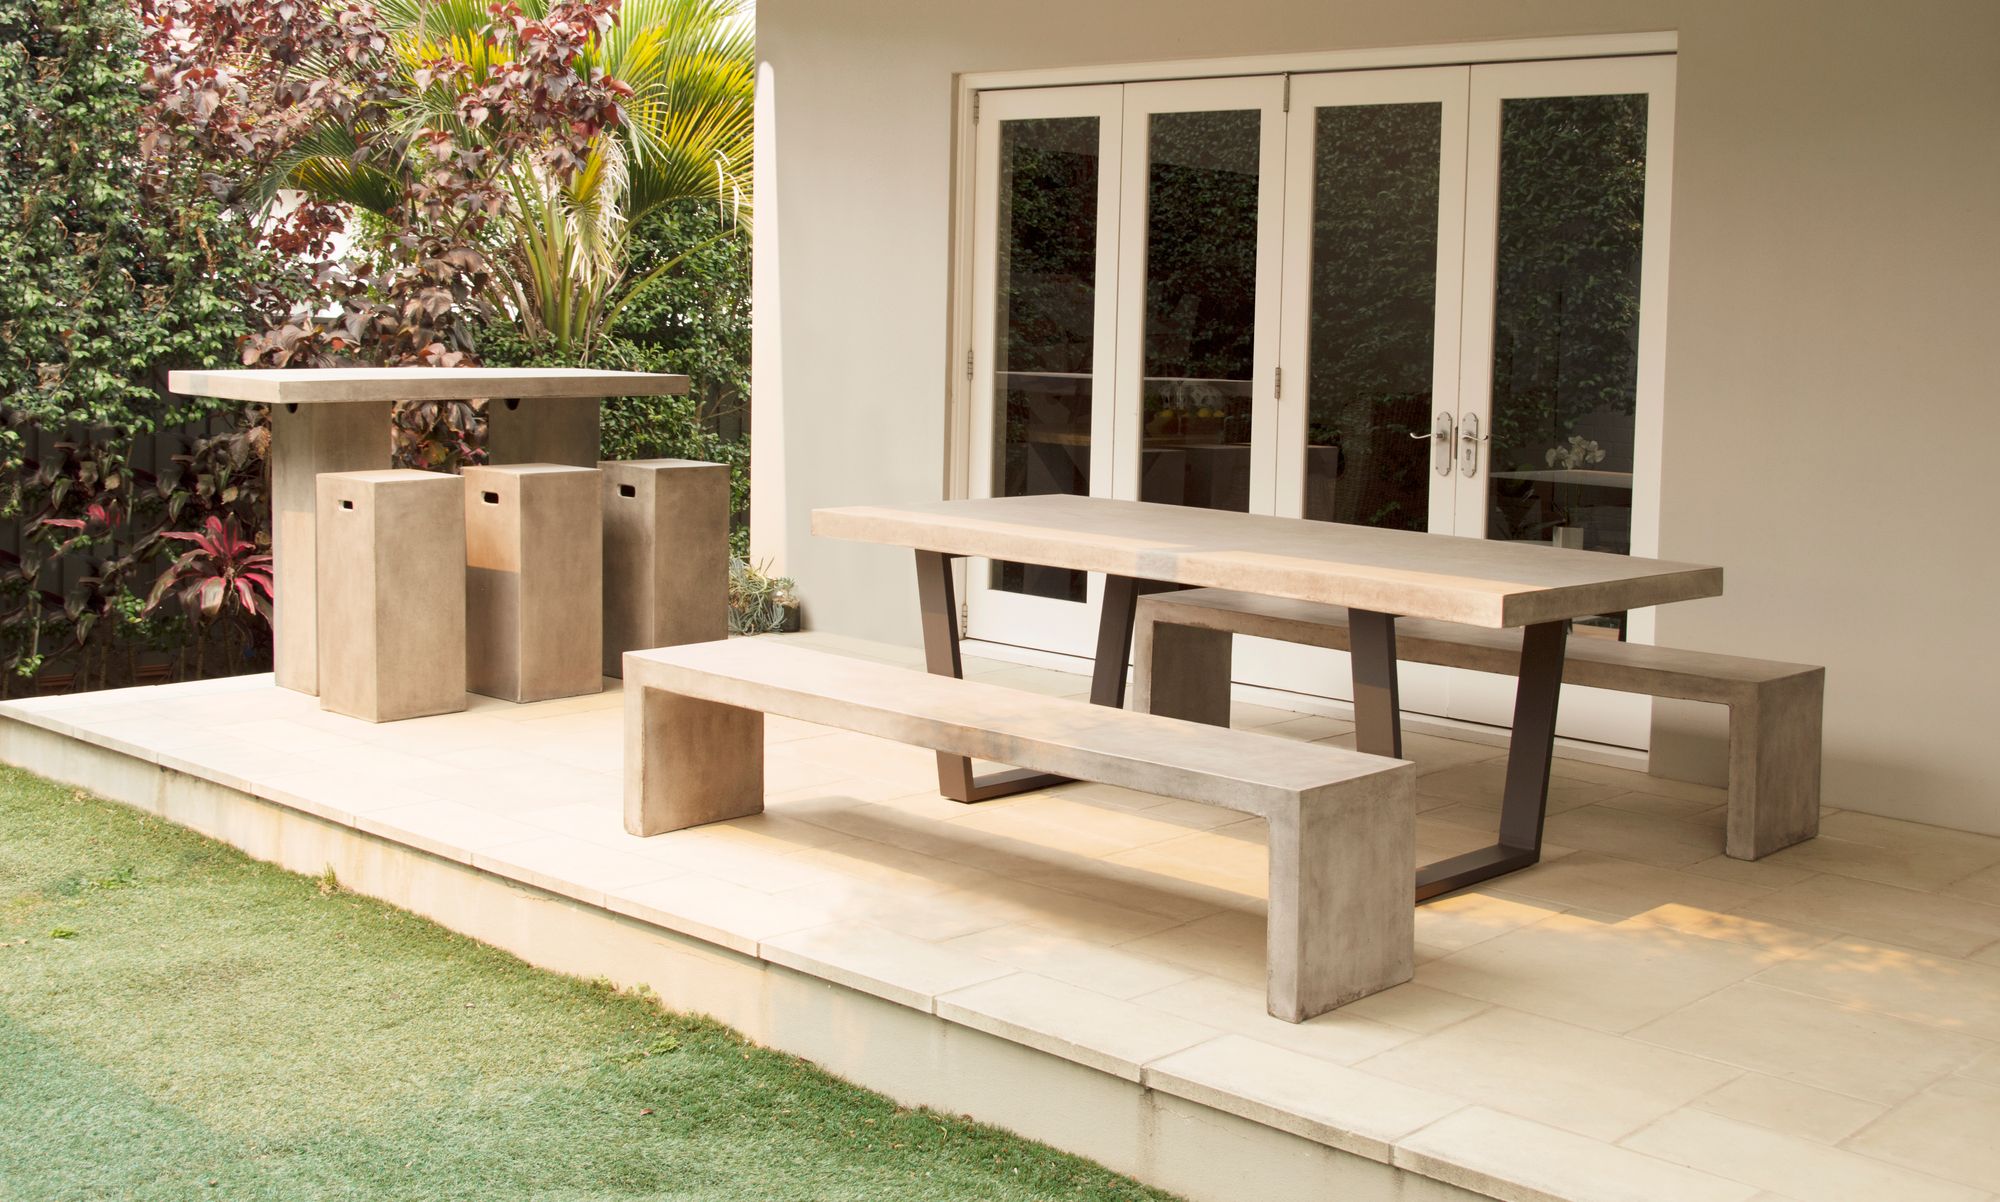 Remarkable Outdoor Living: Zen Outdoor Dining table with Aluminium Trapezoid shade Leg.  A contemporary outdoor dining set, featuring a concrete table and benches, is set against a lush garden backdrop, offering a harmonious blend of man-made structure and natural beauty.